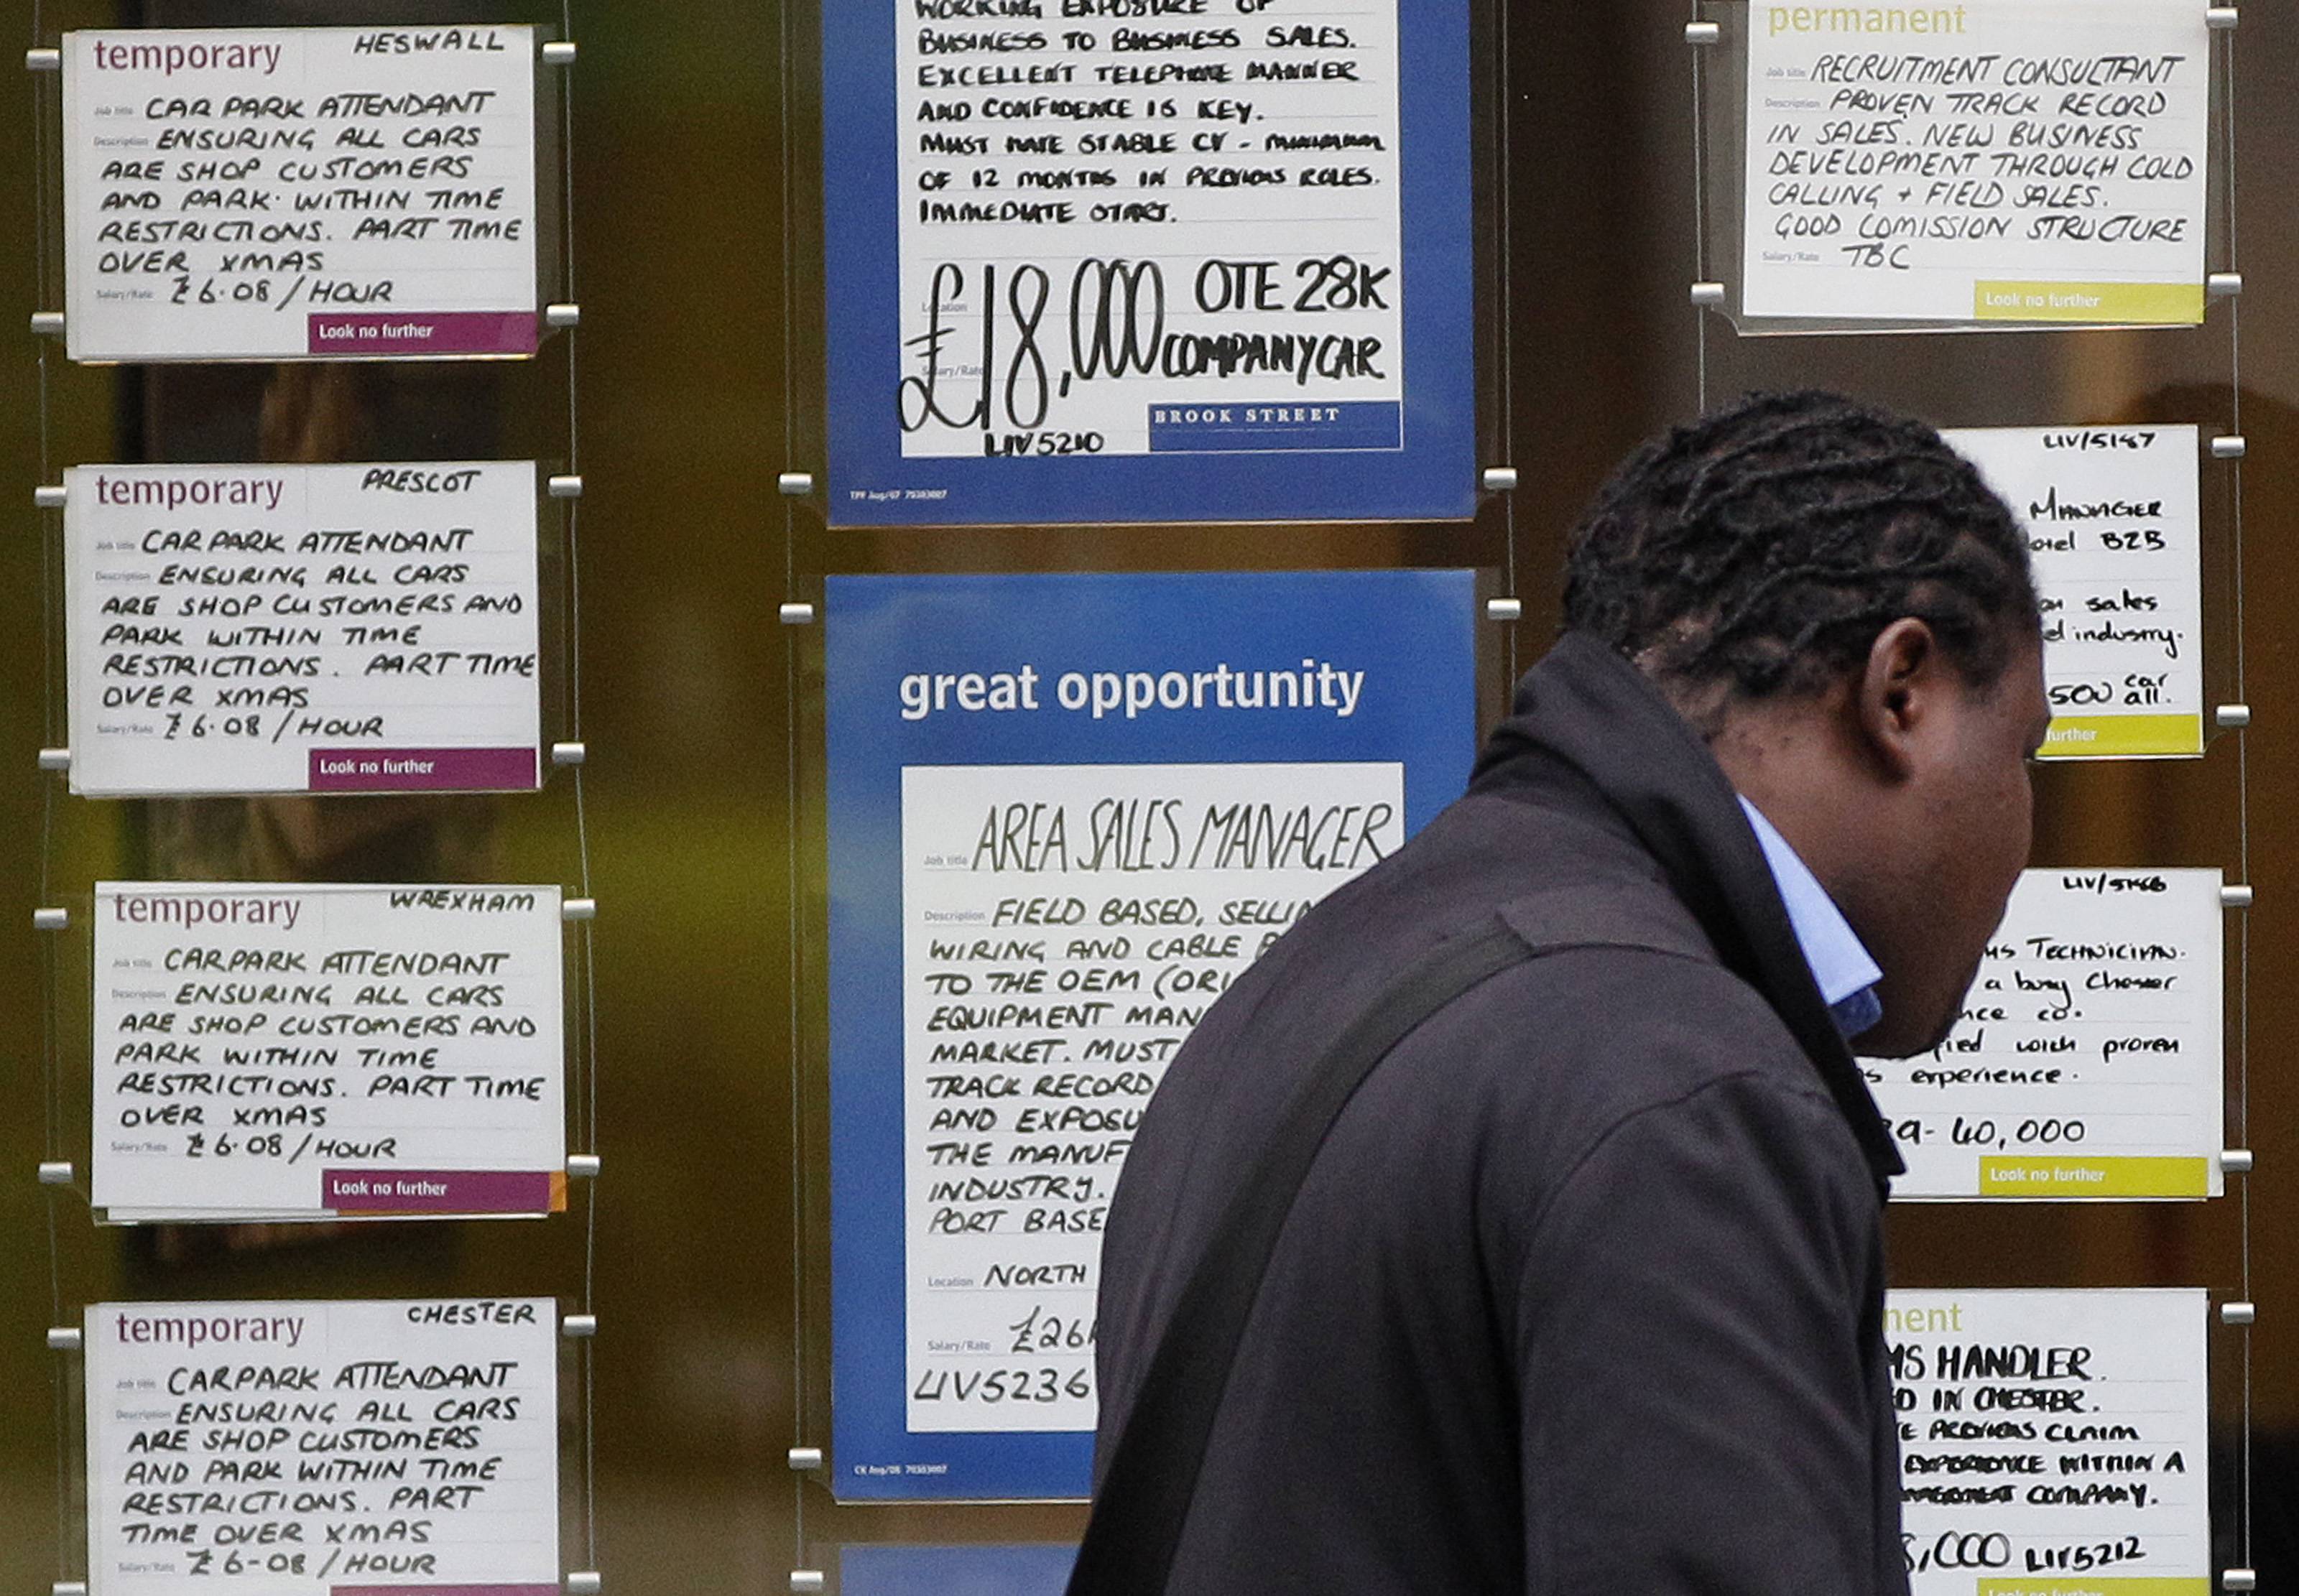 Study: Blacks in Britain More Likely to Be Jobless Than in U.S. - According to research&nbsp;presented Friday, during the last three global recessions, unemployment among Black British men was up to 19 percentage points higher than among those in America. The trend was similar for Black women.\r&nbsp;\r&quot;There is greater ethnic inequality in Britain than in the USA for both sexes … If you are Black you are more likely to be without work in the U.K.,” said Yaojun Li, professor of sociology at Manchester University.\r(Photo: REUTERS/Phil Noble)